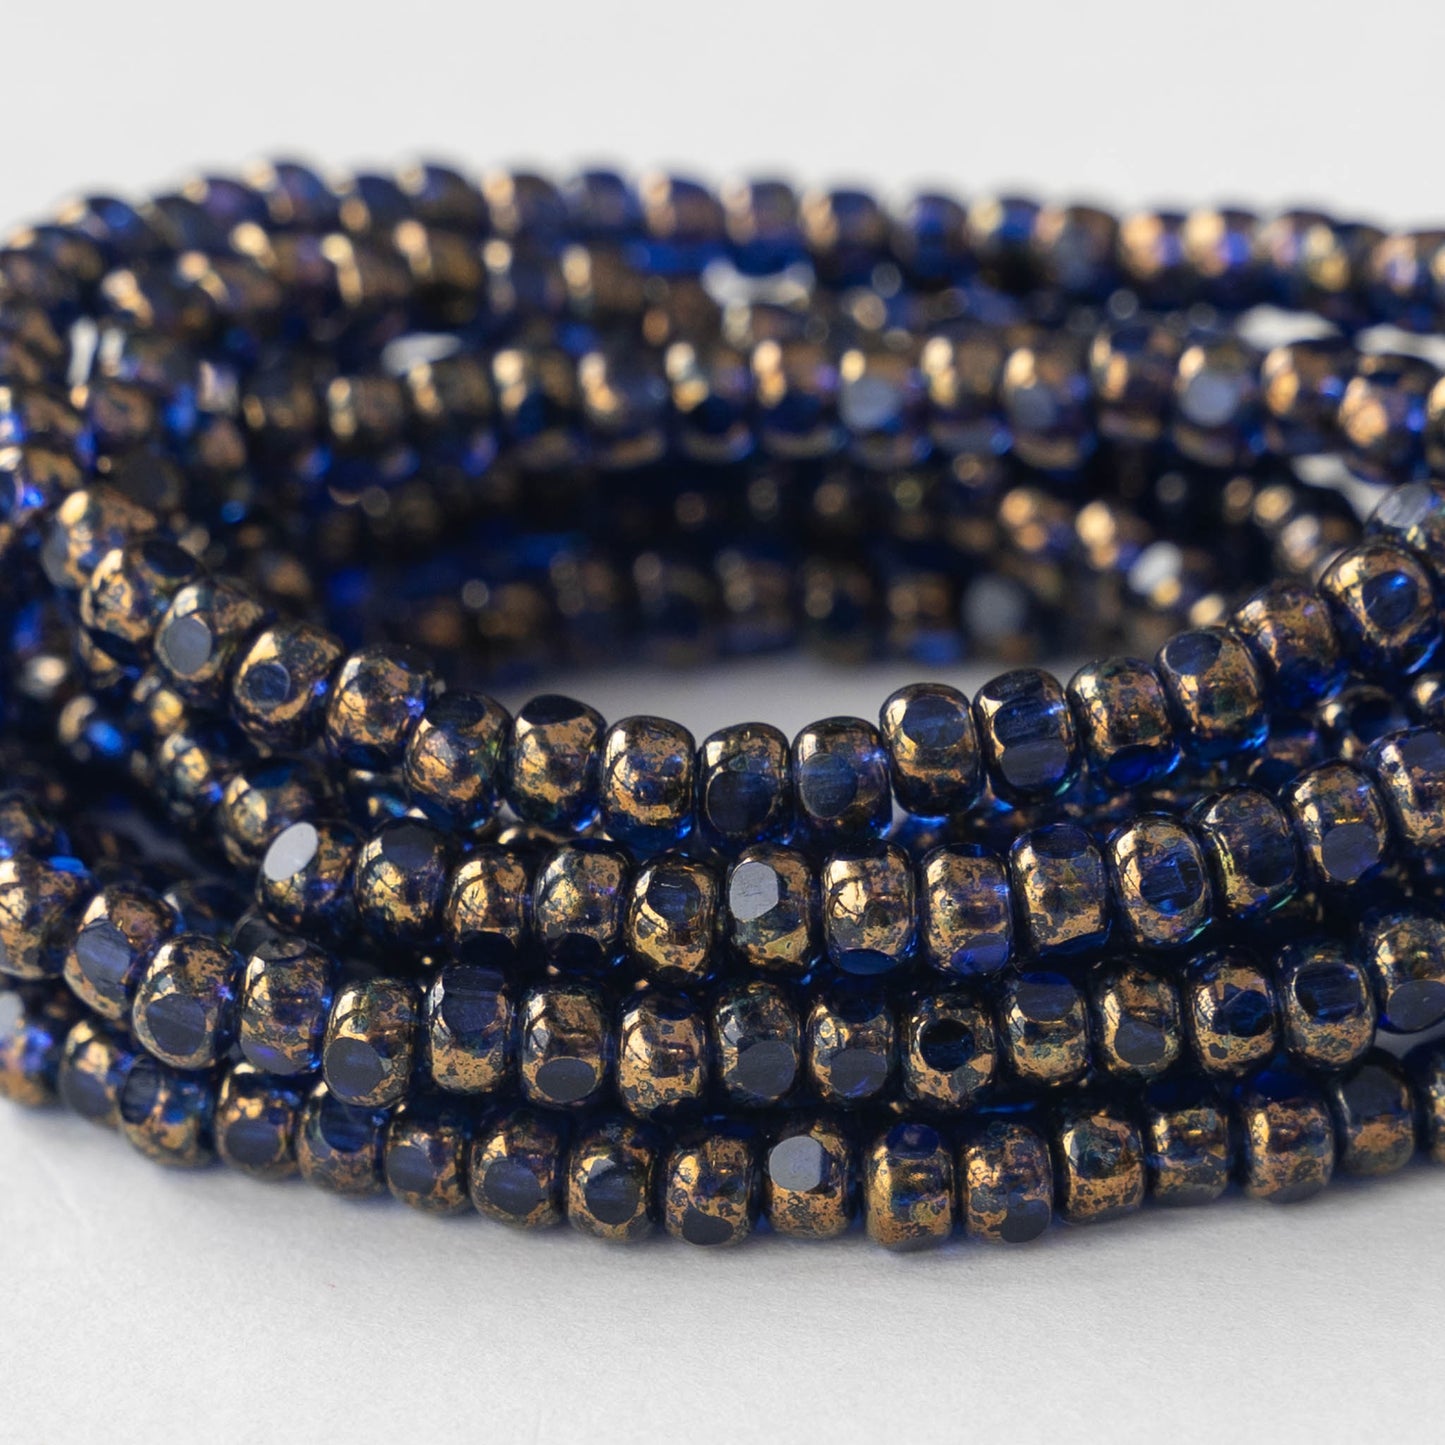 Size 6/0 Trica Seed Beads - Sapphire with Gold - 50 beads